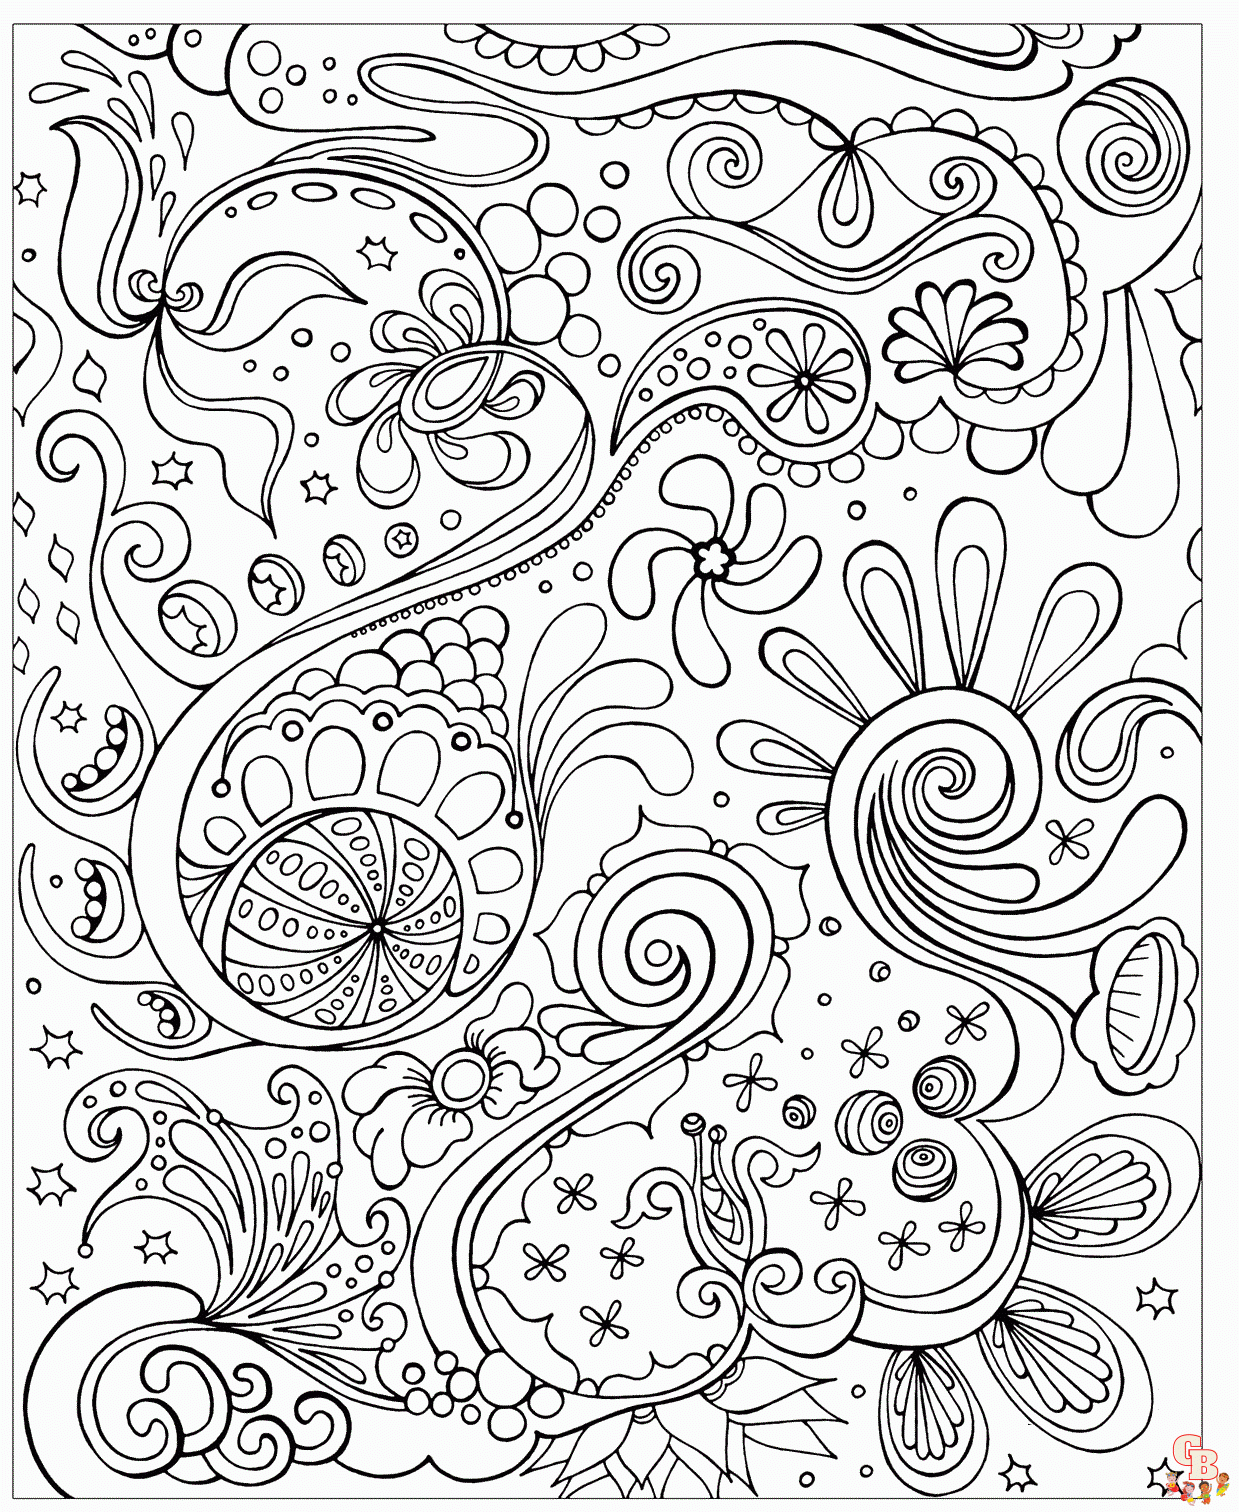 Mindfulness Coloring Pages 1